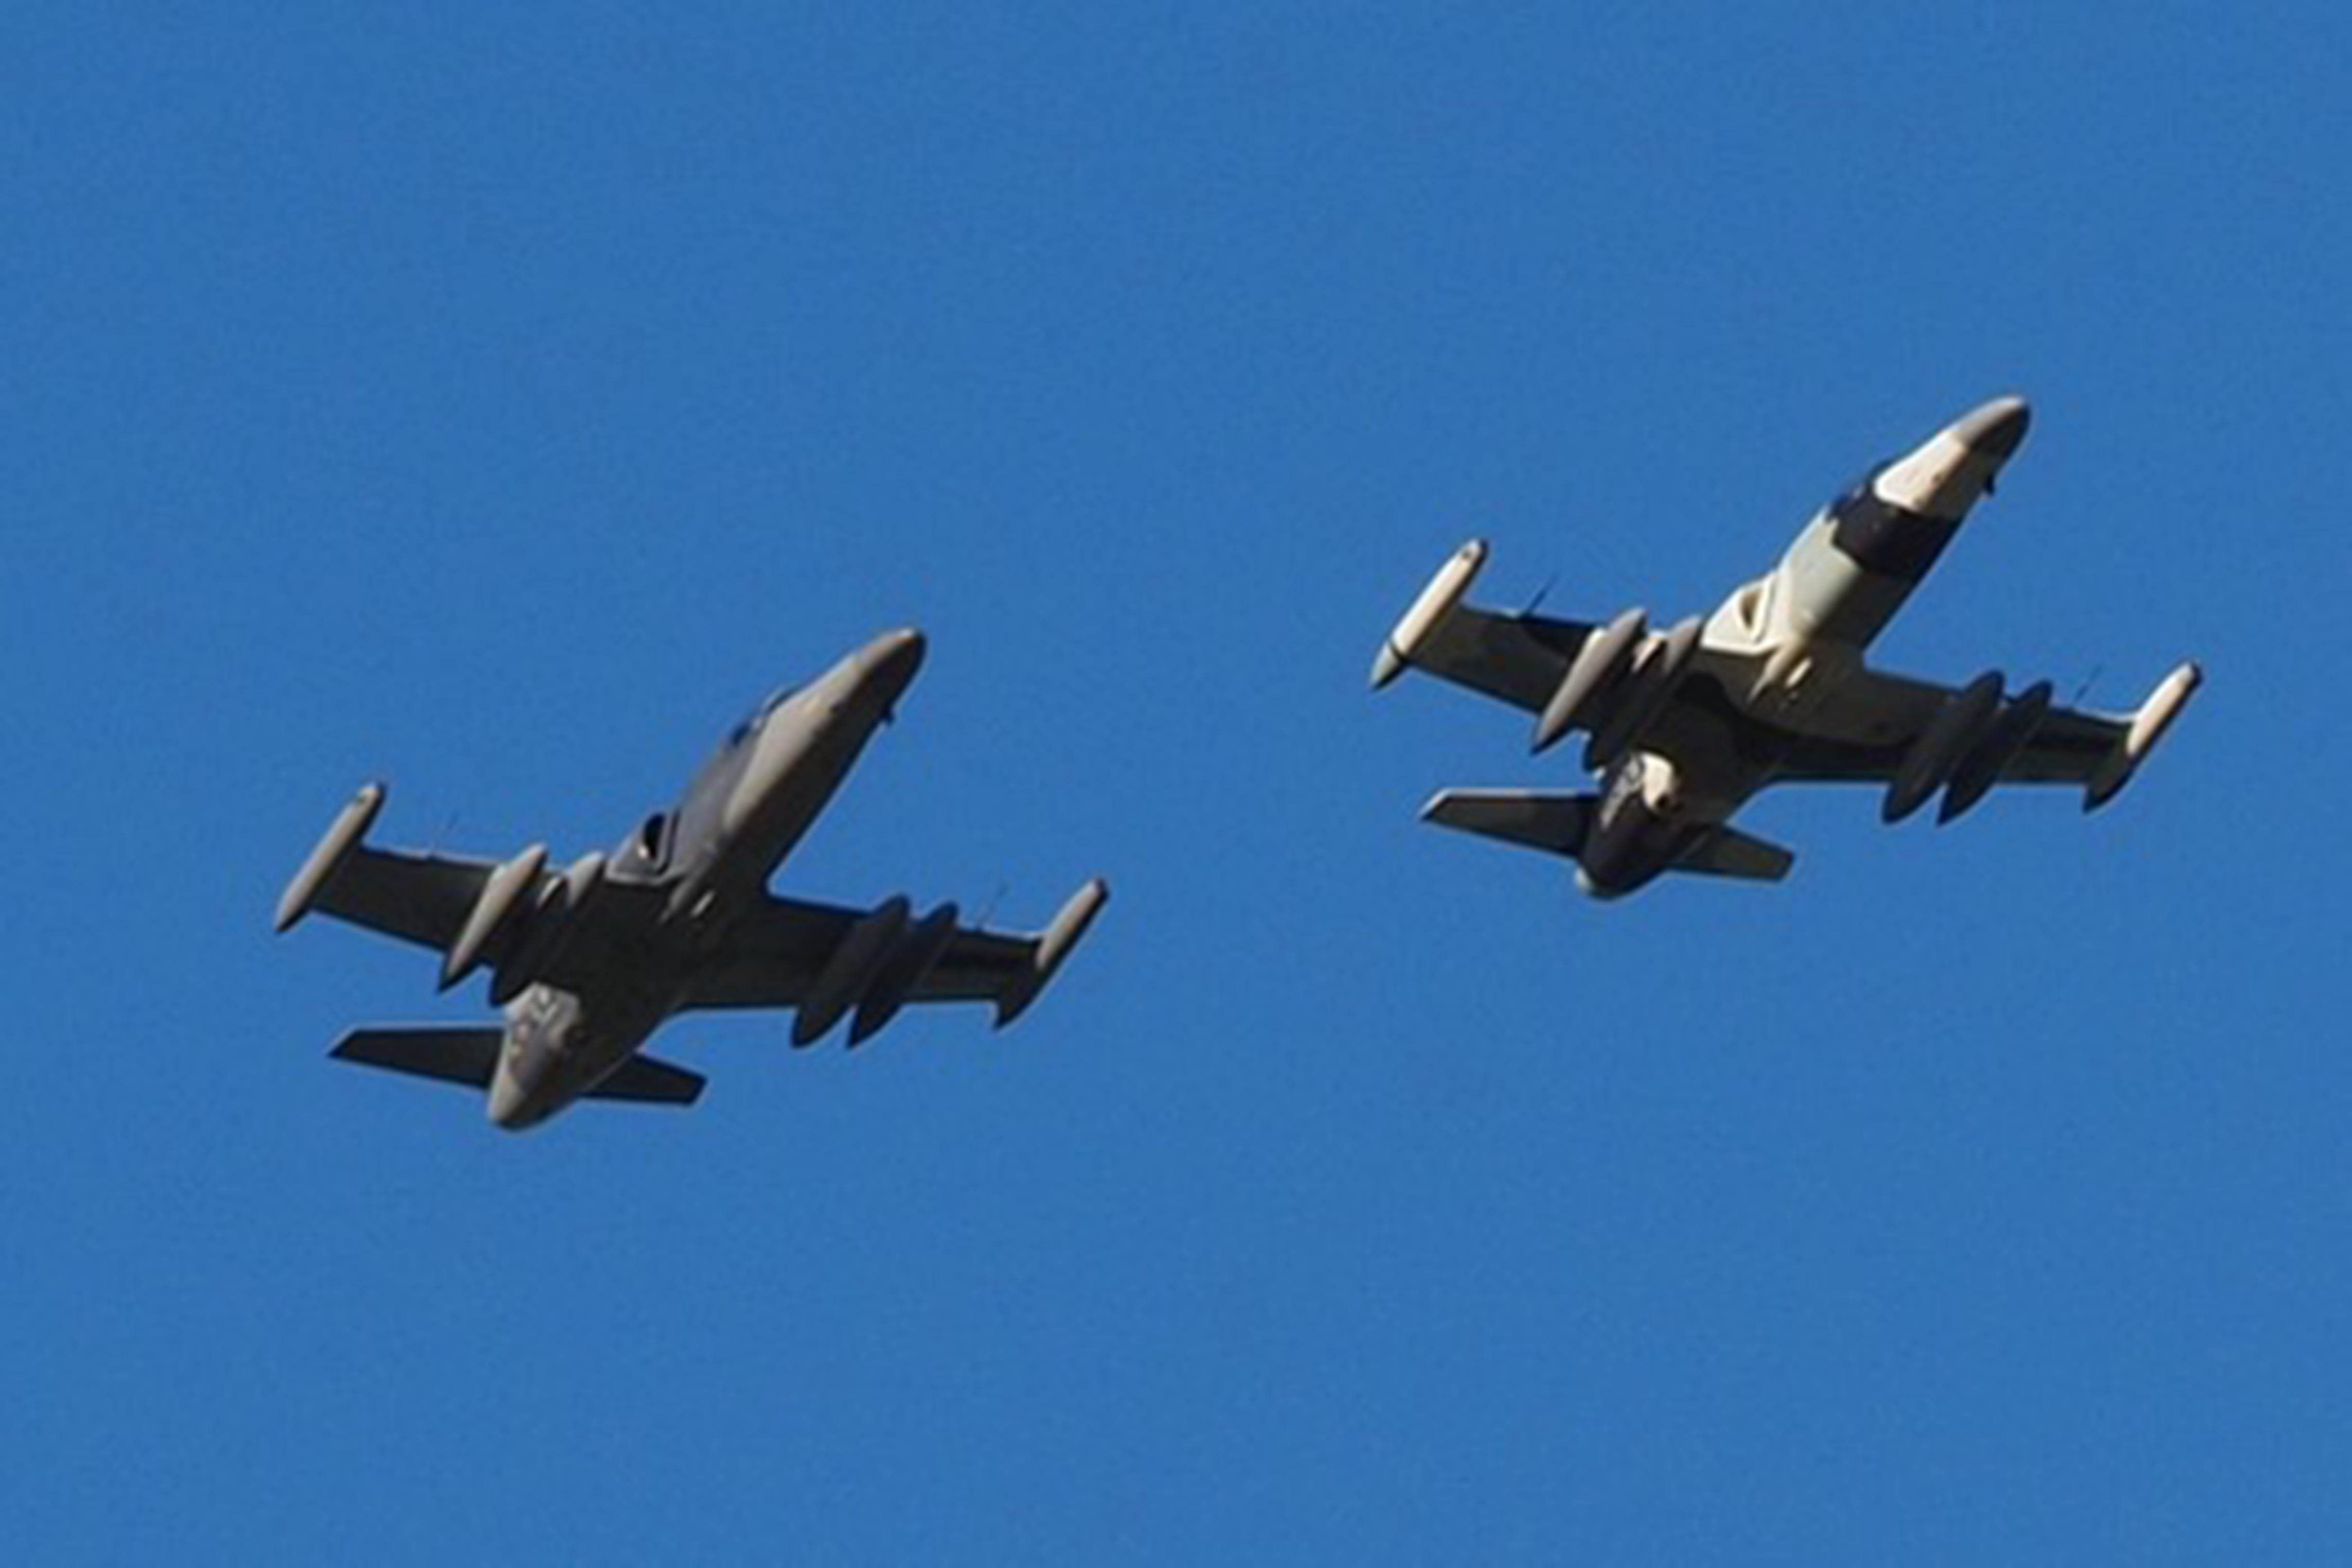 Image shows two aircraft in flight.